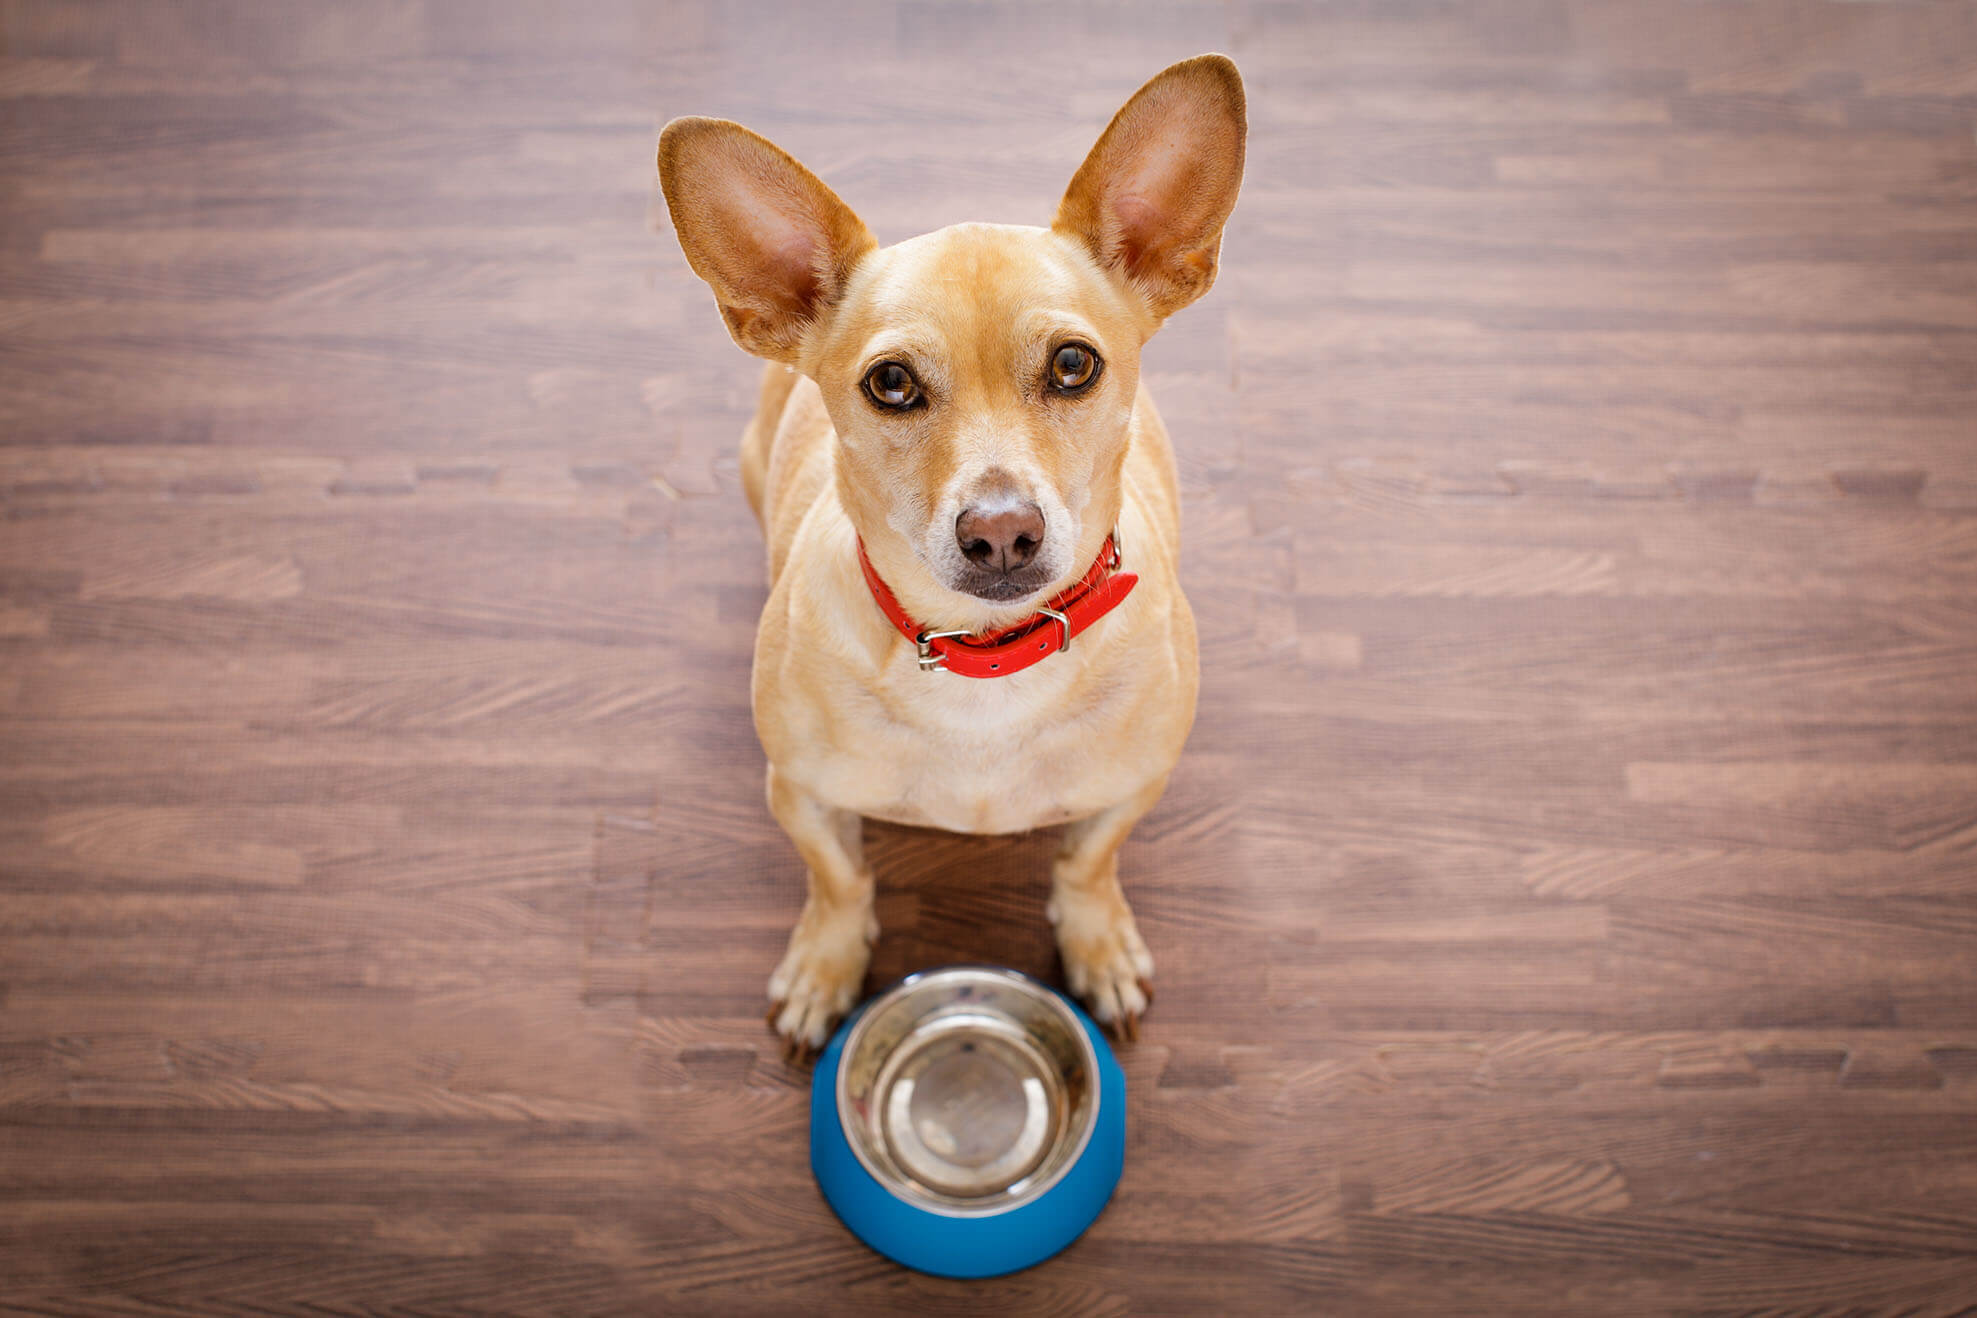 5 Meatiful tips for feeding your dog